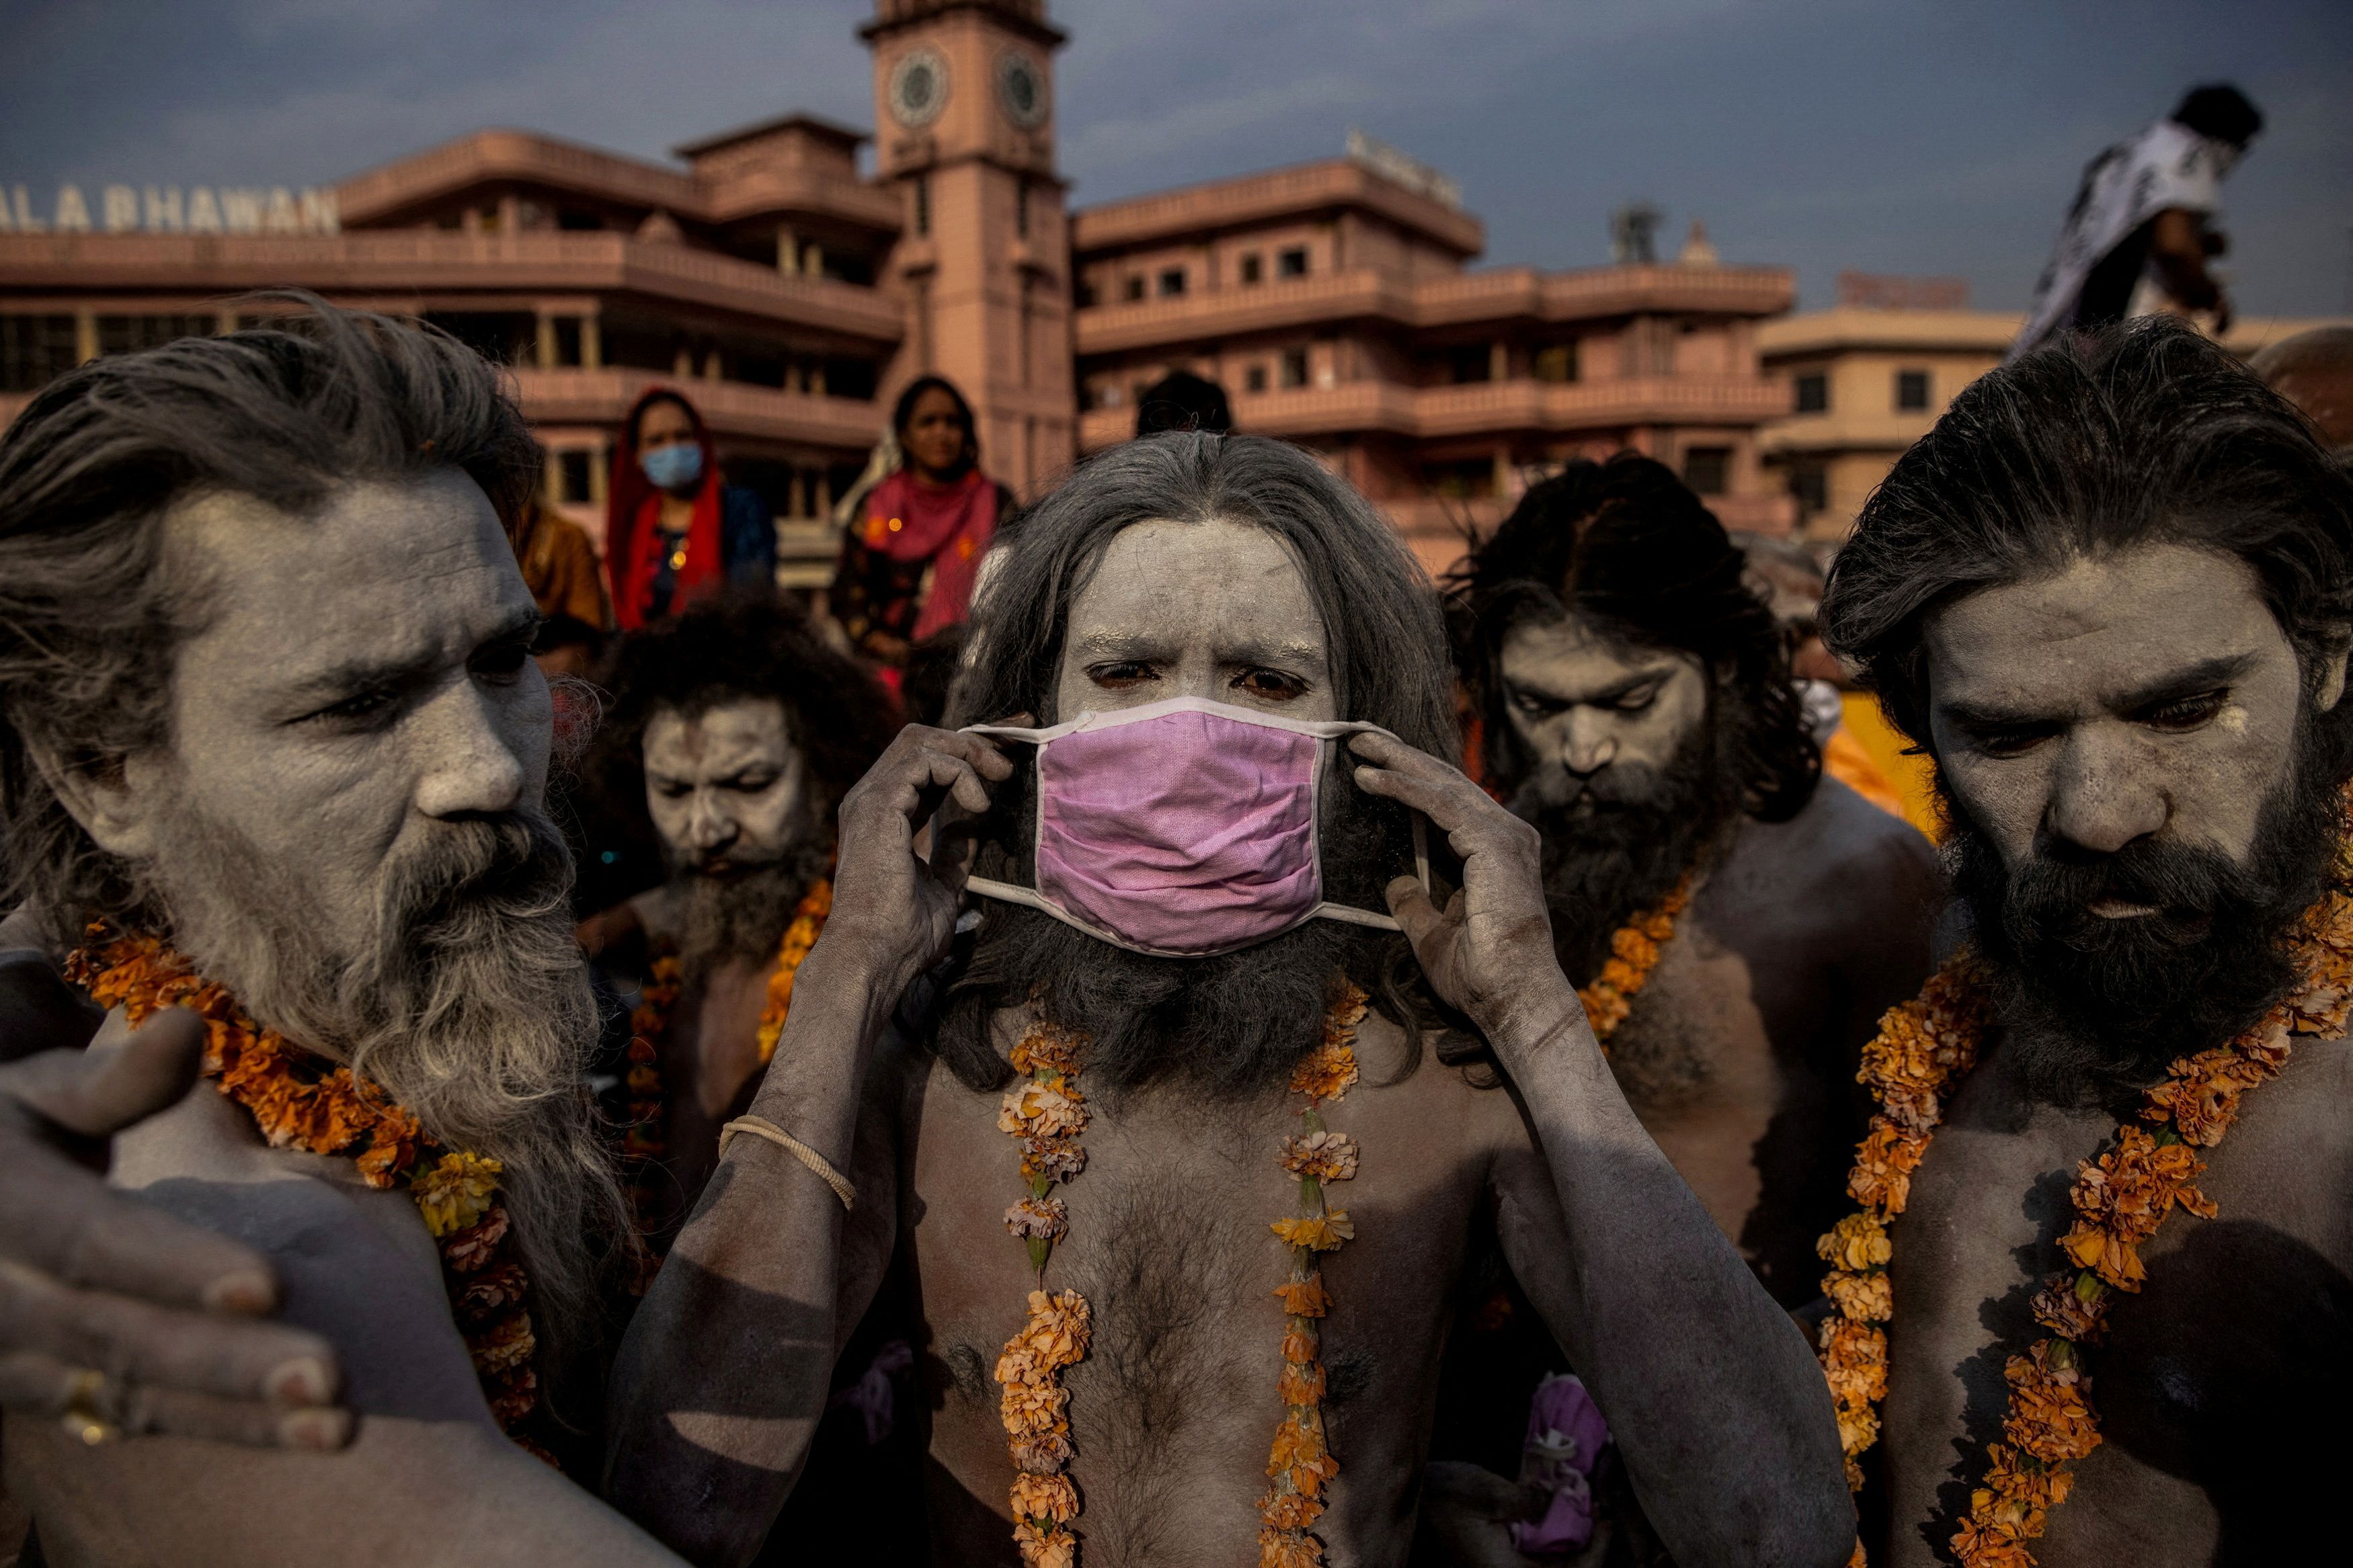 Reuters wins Pulitzer for intimate, devastating images of India's pandemic